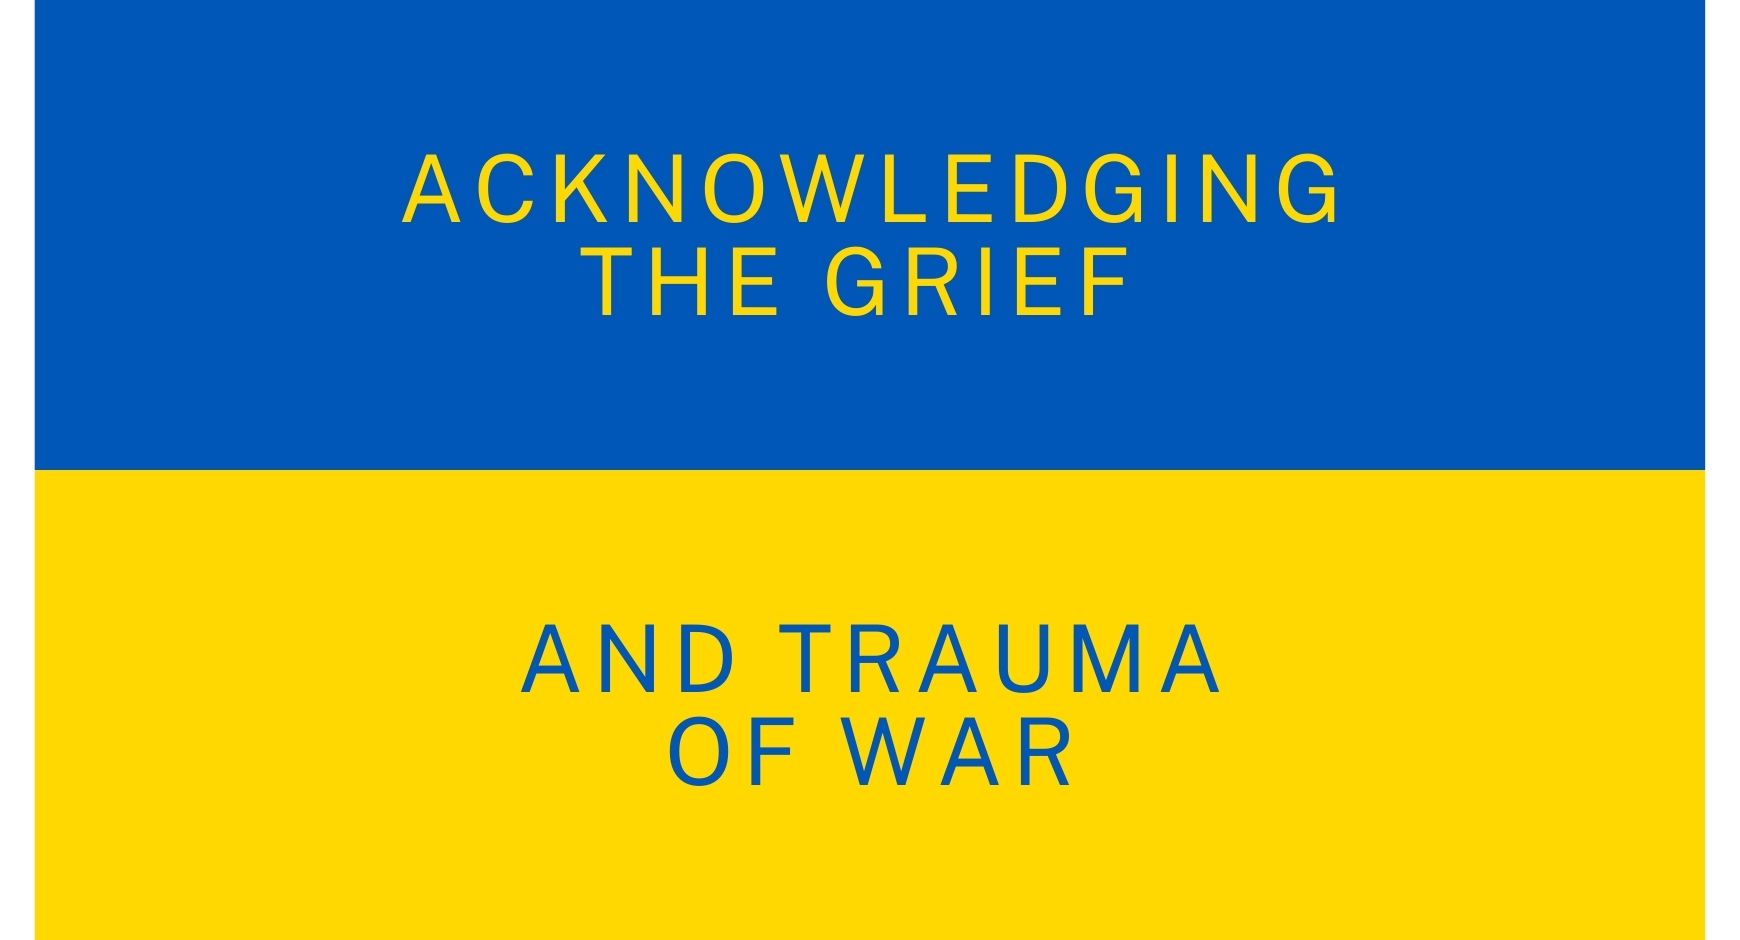 Acknowledging the Grief and Trauma of War